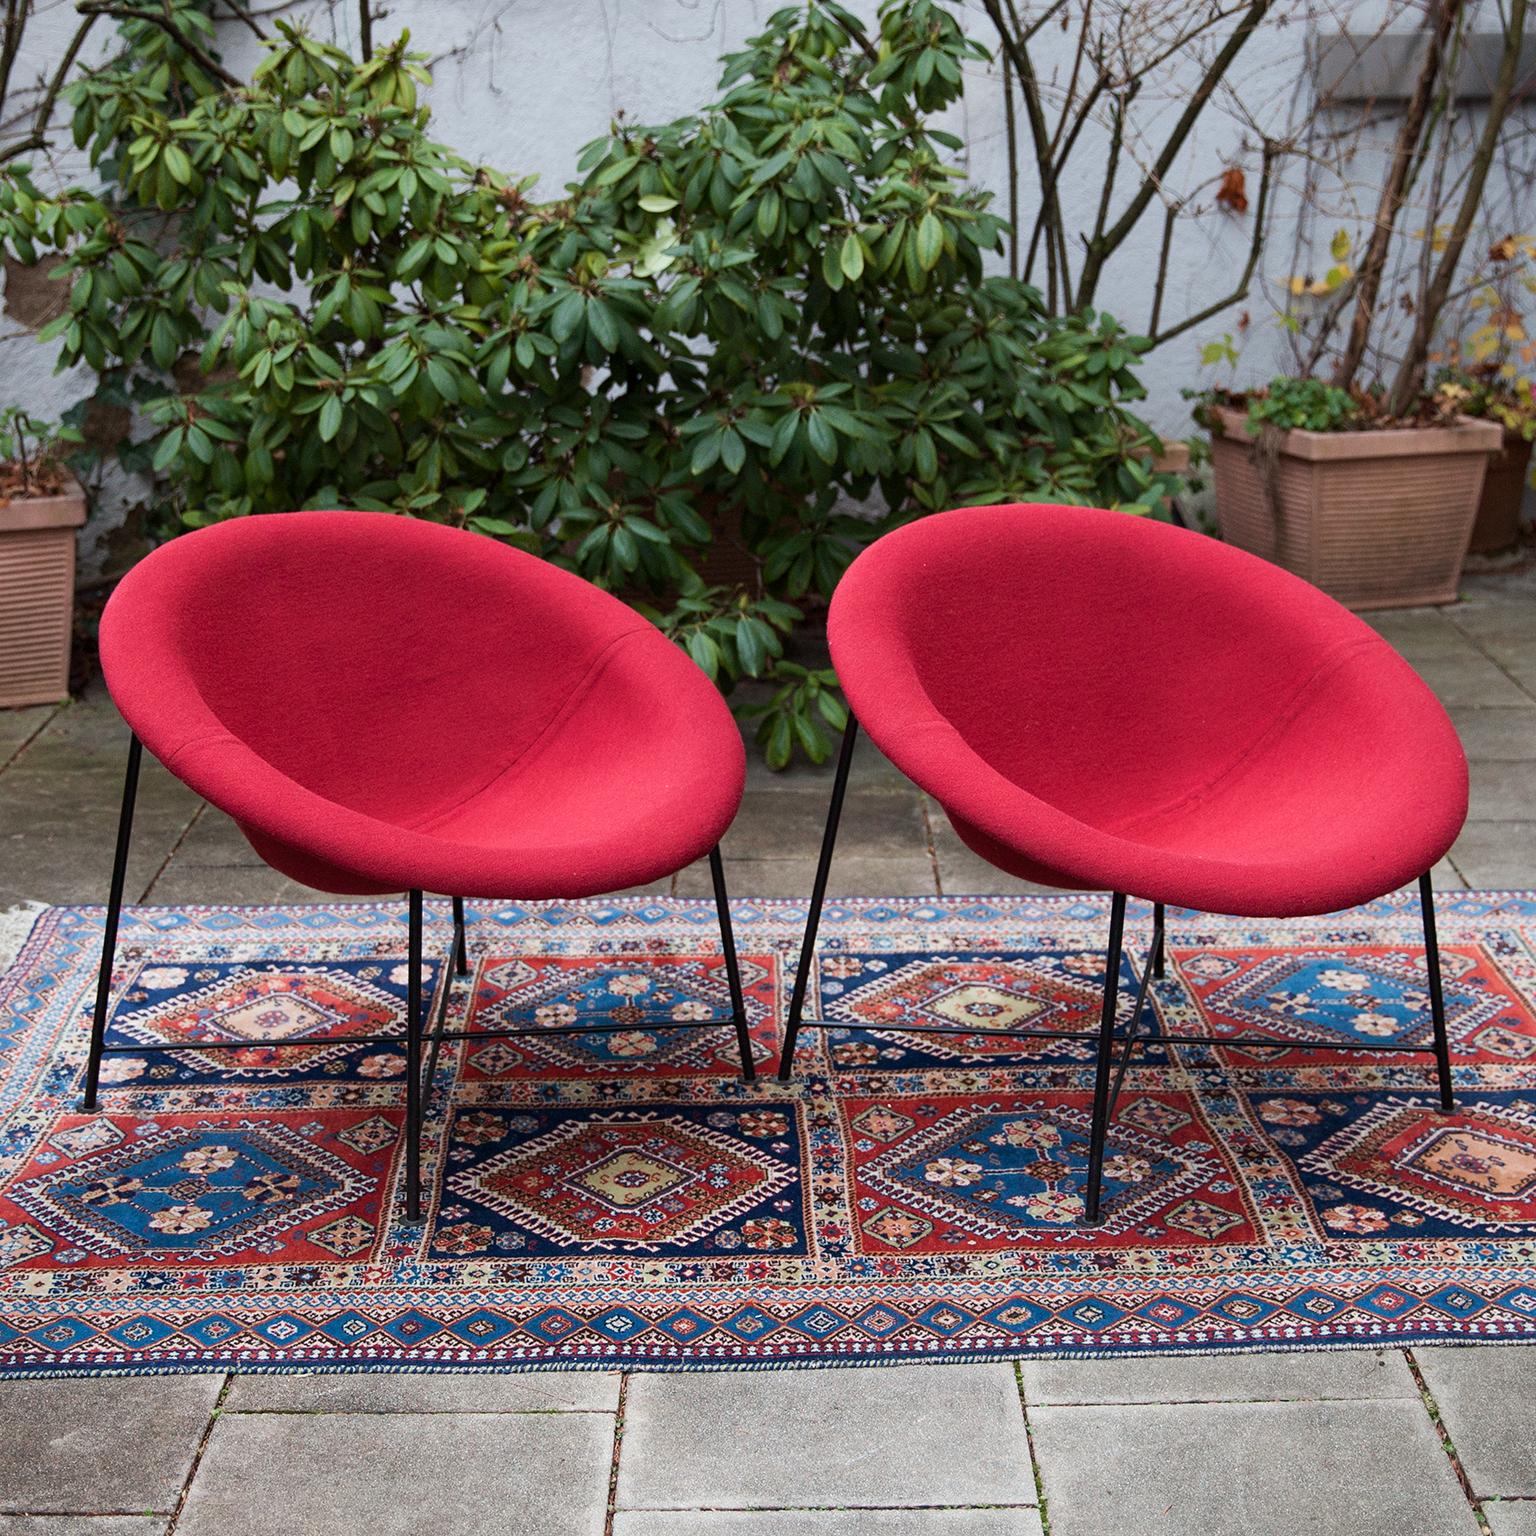 Pair of shell chairs Model 774. Designed circa 1957. Polyester seat, new newly upholstered Bordeaux red fabric, black lacquered metal.
Literature: Hatjes, Wie Wohnen Band 3 Möbel, Stuttgart 1957, Abb. S. 58.